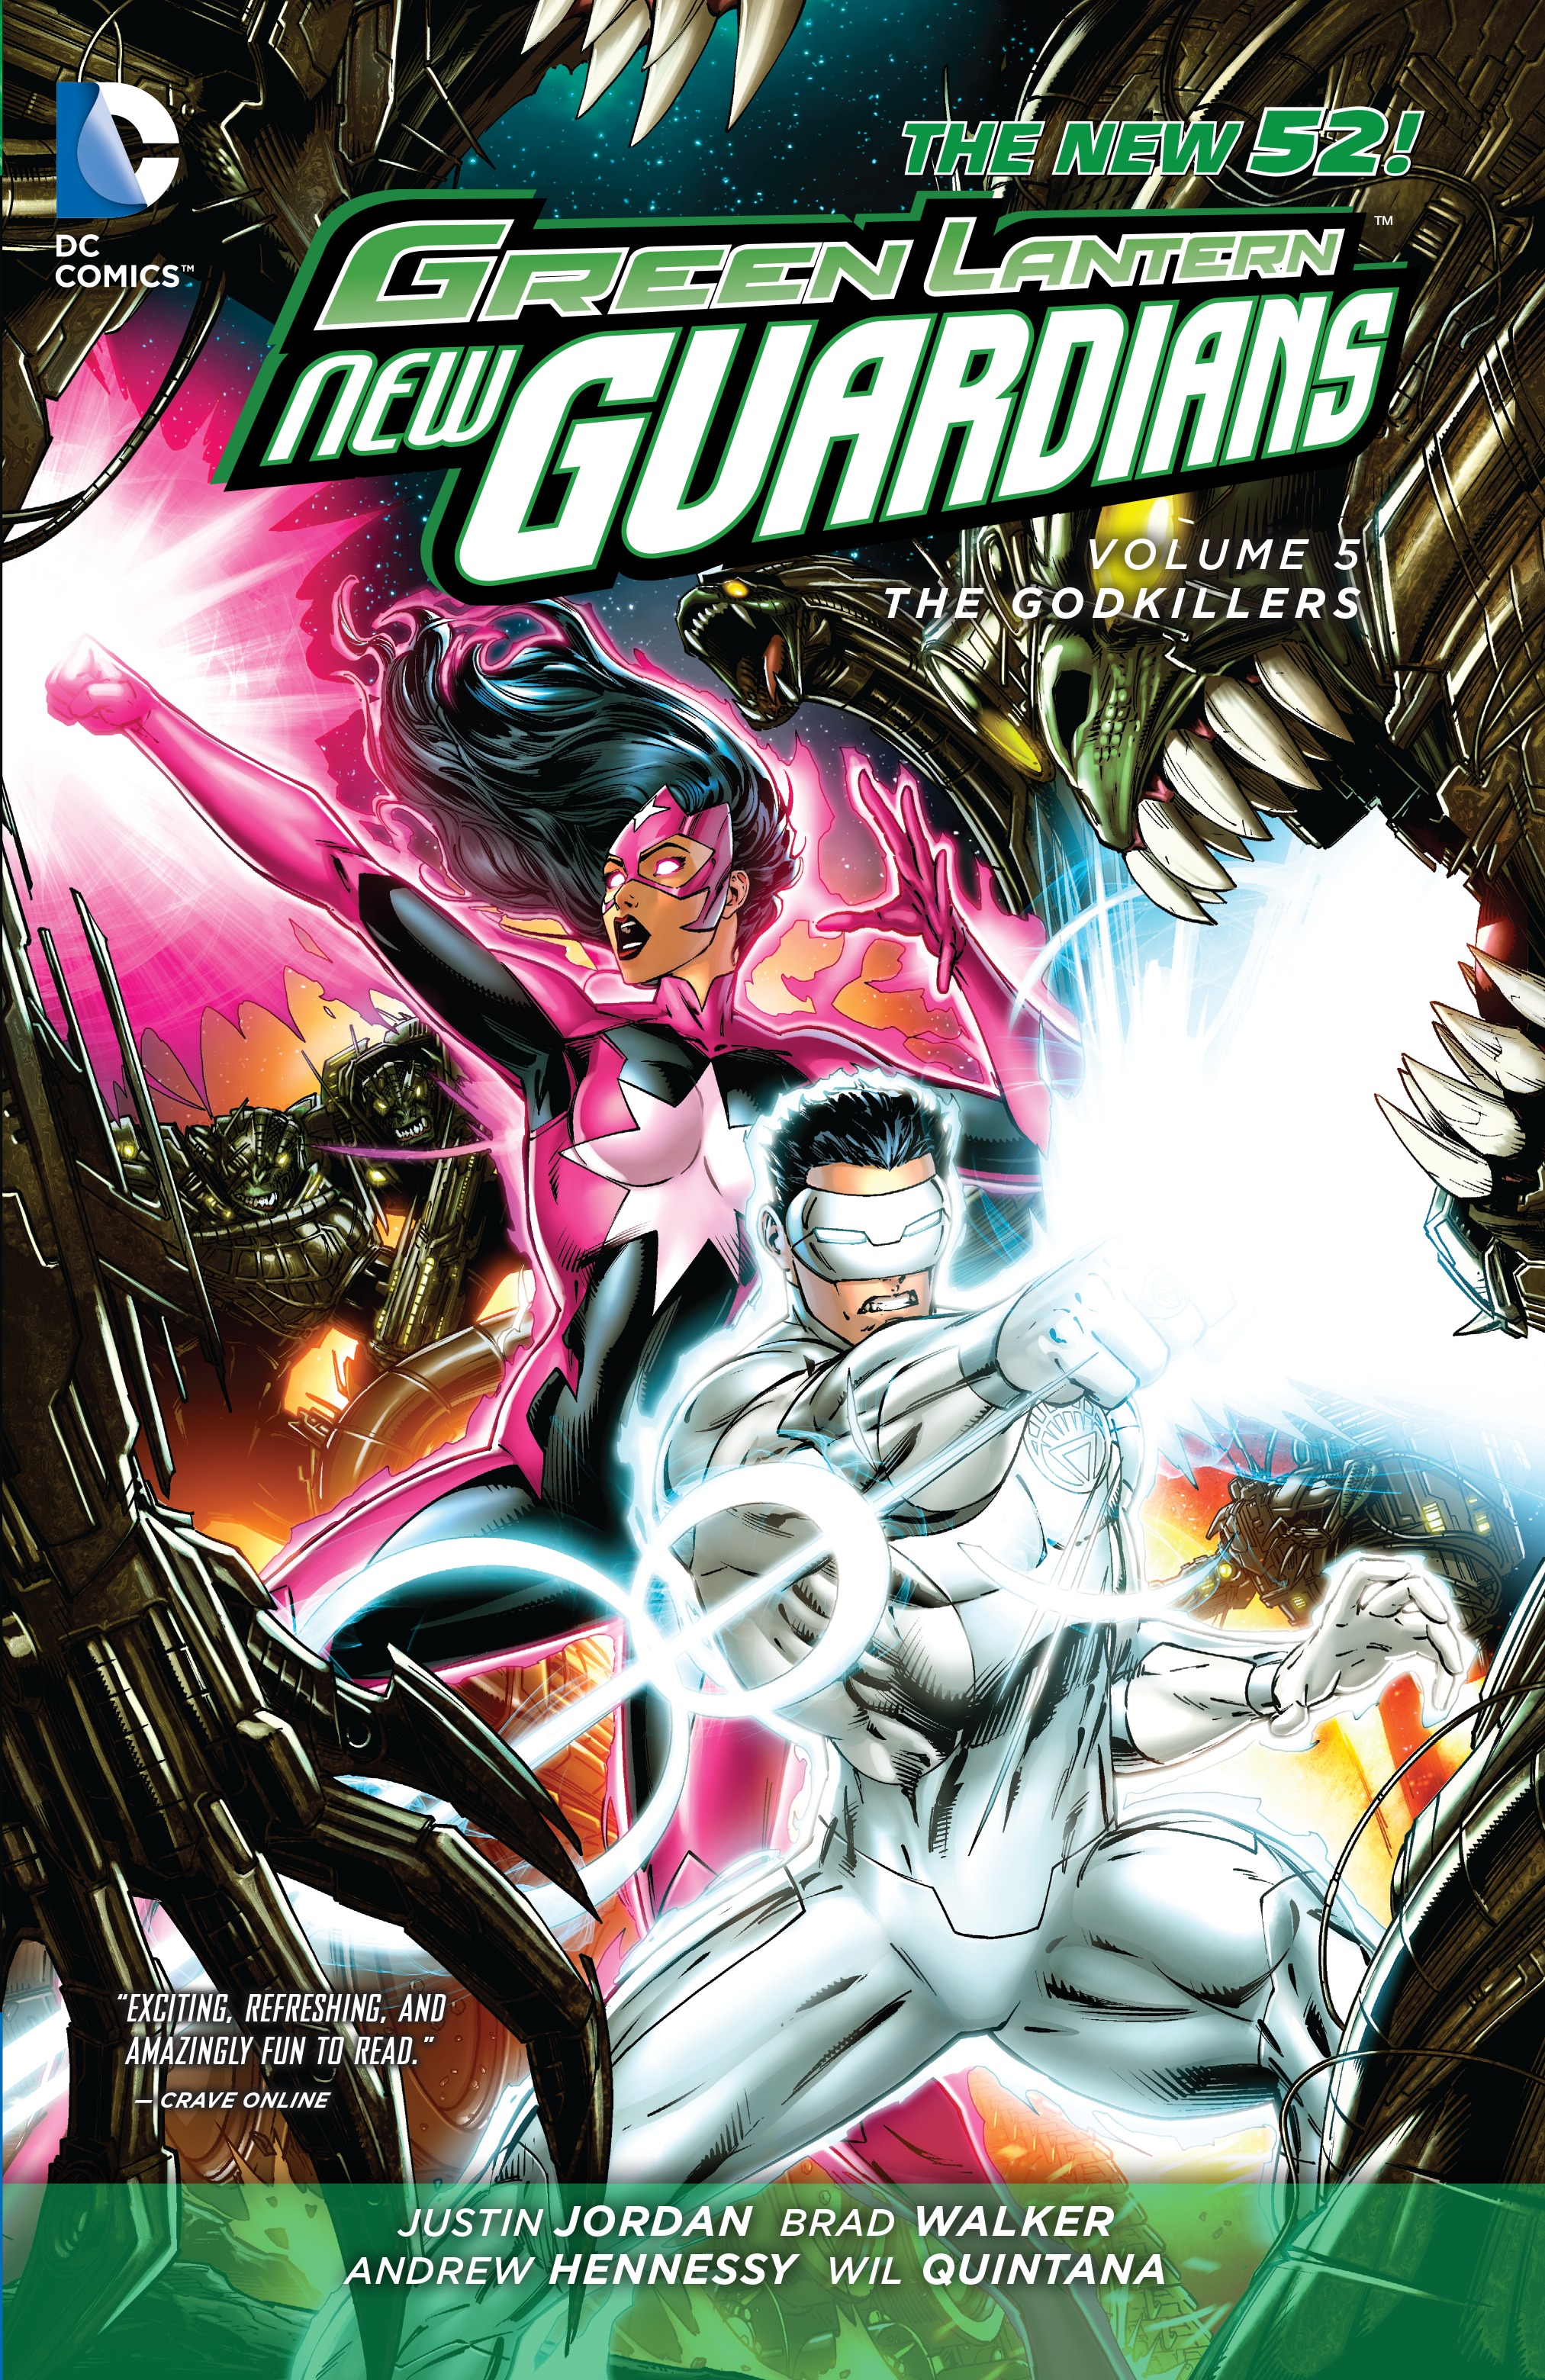 Green Lantern: New Guardians Vol. 5: Godkillers (The New 52) - image 1 of 2